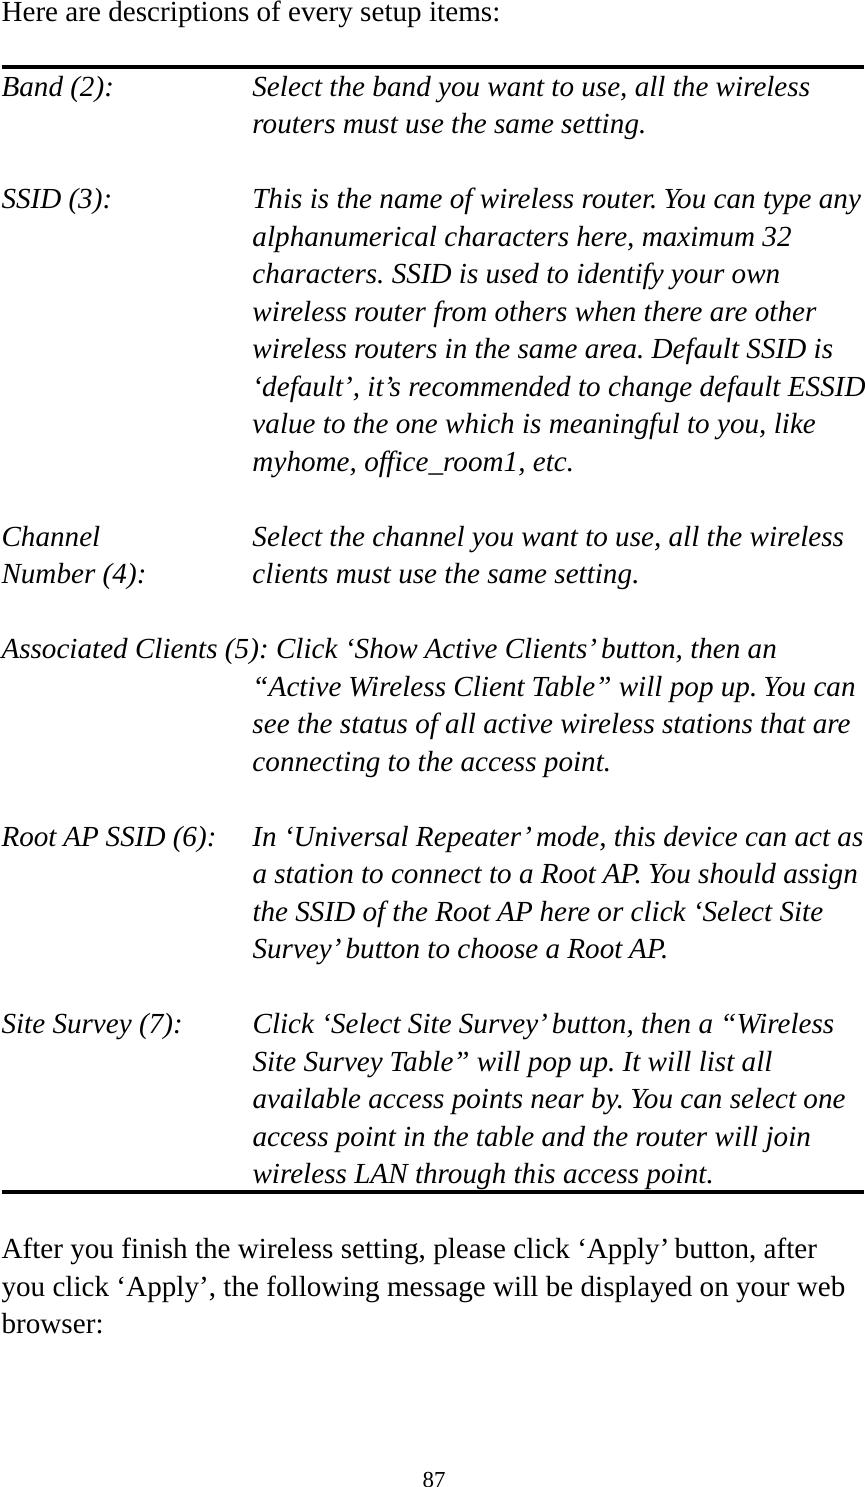 87 Here are descriptions of every setup items:  Band (2):  Select the band you want to use, all the wireless routers must use the same setting.  SSID (3):  This is the name of wireless router. You can type any alphanumerical characters here, maximum 32 characters. SSID is used to identify your own wireless router from others when there are other wireless routers in the same area. Default SSID is ‘default’, it’s recommended to change default ESSID value to the one which is meaningful to you, like myhome, office_room1, etc.  Channel  Select the channel you want to use, all the wireless Number (4):  clients must use the same setting.  Associated Clients (5): Click ‘Show Active Clients’ button, then an “Active Wireless Client Table” will pop up. You can see the status of all active wireless stations that are connecting to the access point.  Root AP SSID (6):  In ‘Universal Repeater’ mode, this device can act as a station to connect to a Root AP. You should assign the SSID of the Root AP here or click ‘Select Site Survey’ button to choose a Root AP.  Site Survey (7):  Click ‘Select Site Survey’ button, then a “Wireless Site Survey Table” will pop up. It will list all available access points near by. You can select one access point in the table and the router will join wireless LAN through this access point.  After you finish the wireless setting, please click ‘Apply’ button, after you click ‘Apply’, the following message will be displayed on your web browser:  